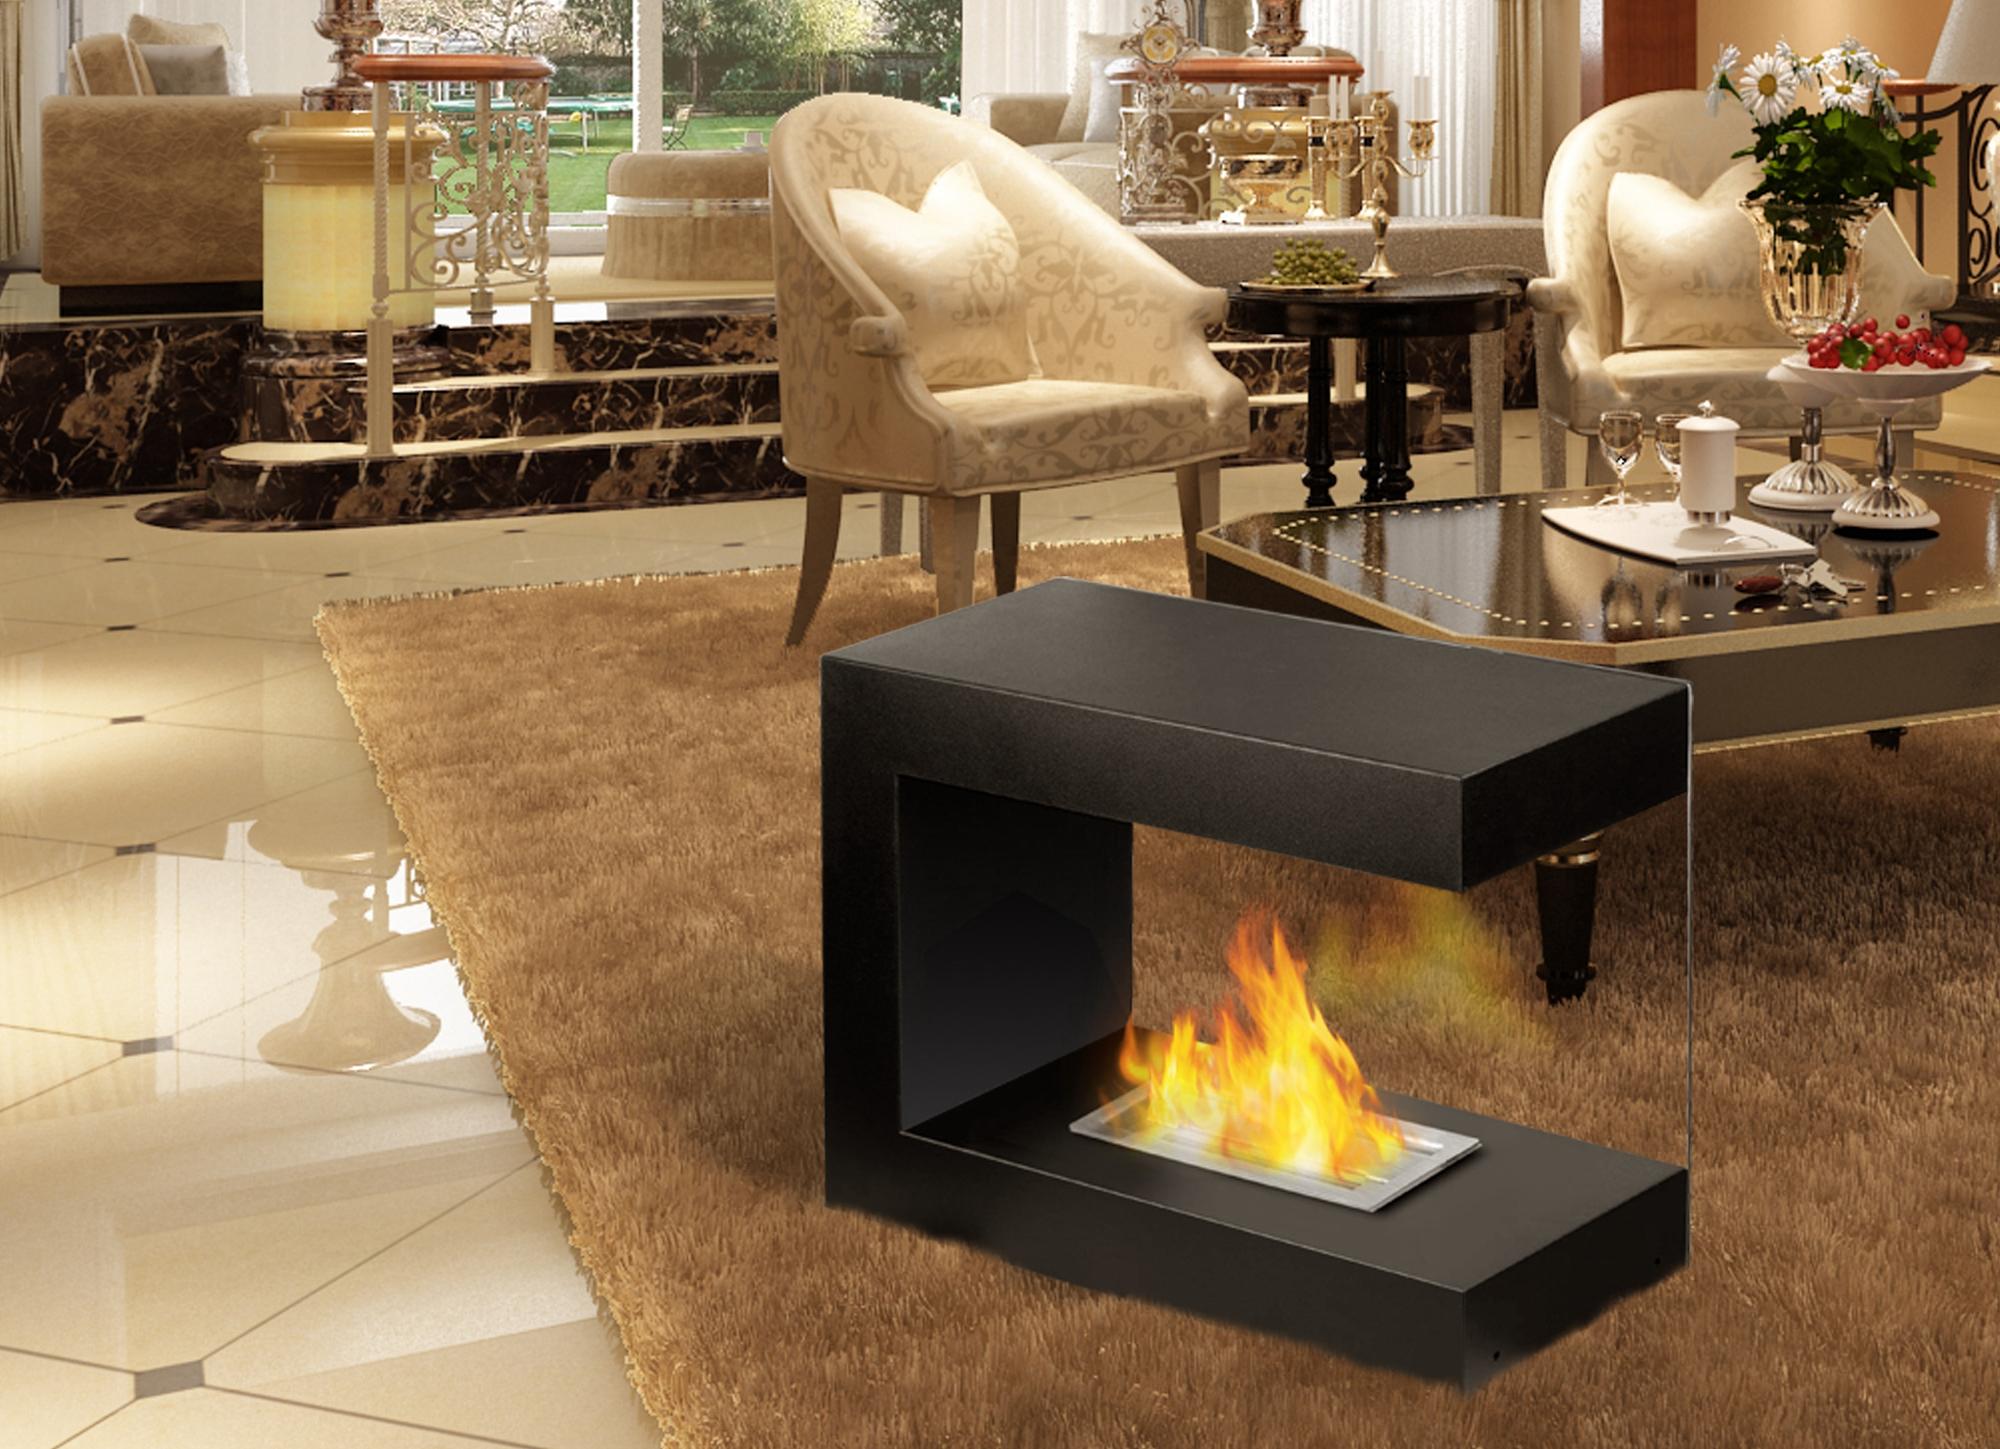 2019 trendy design modern style ethanol fireplace for indoor heating and home decoration